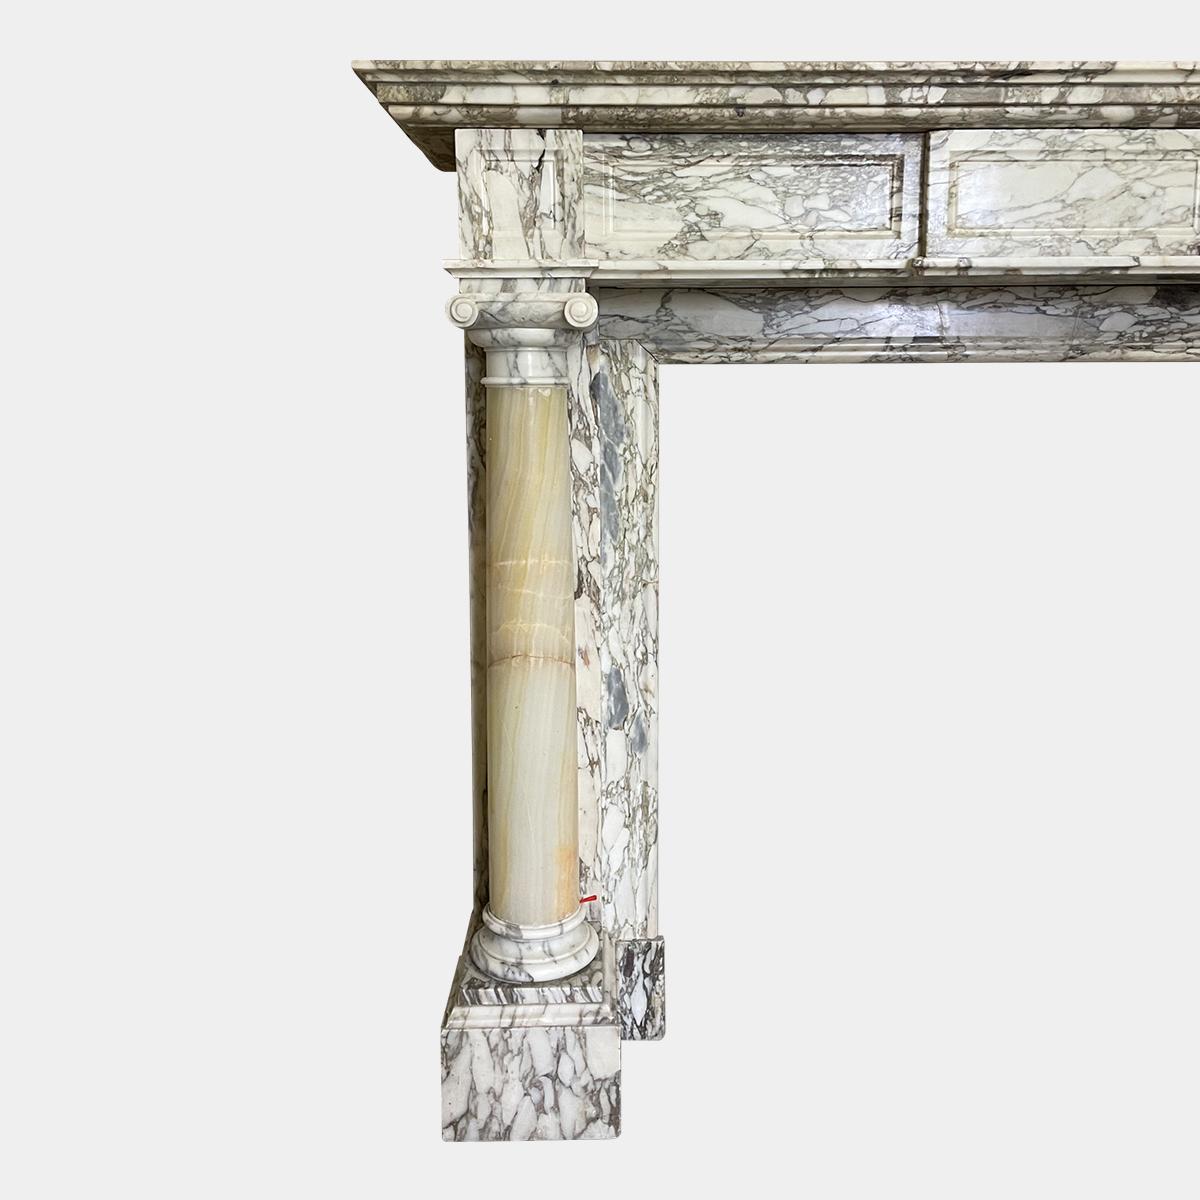 A large antique French fireplace in the neoclassical manner. Executed in quality Breche Marble. The jambs with Alabaster columns, supported on large square foot blocks with Ionic  capitals, surmounted by square fielded corner blocks. The panelled